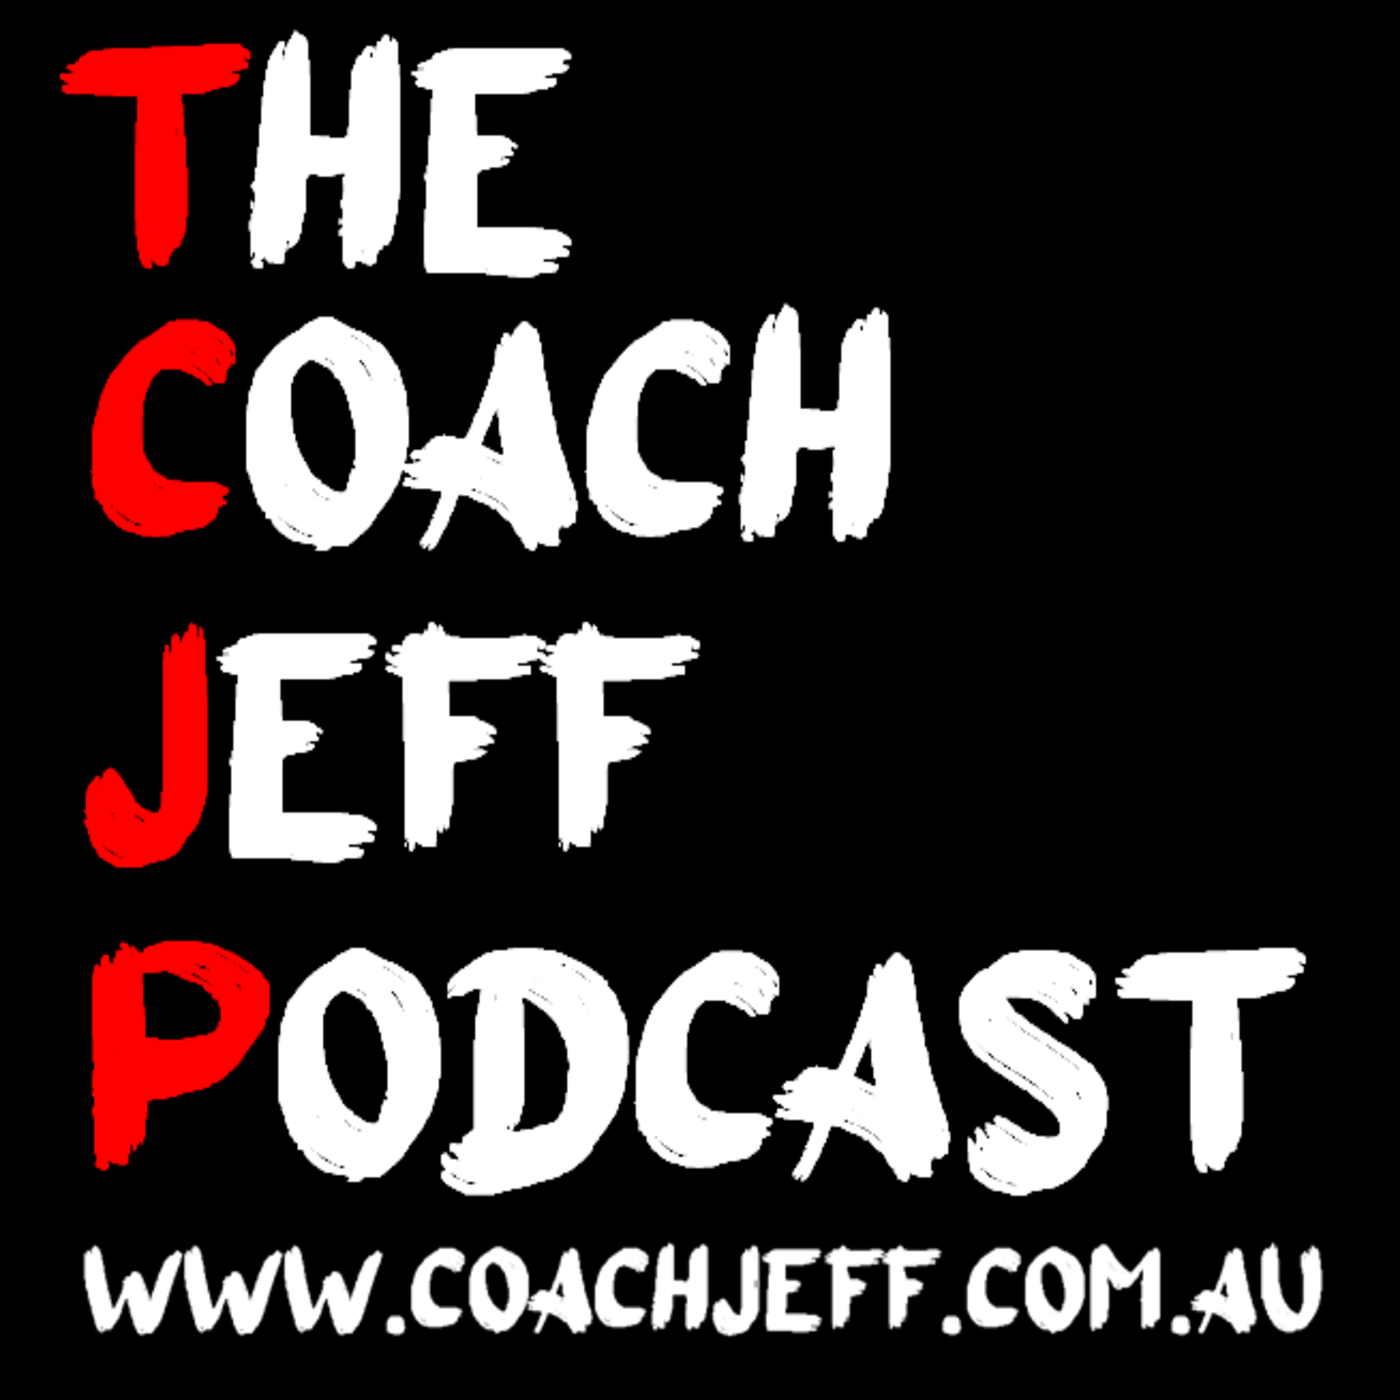 The Coach Jeff Podcast